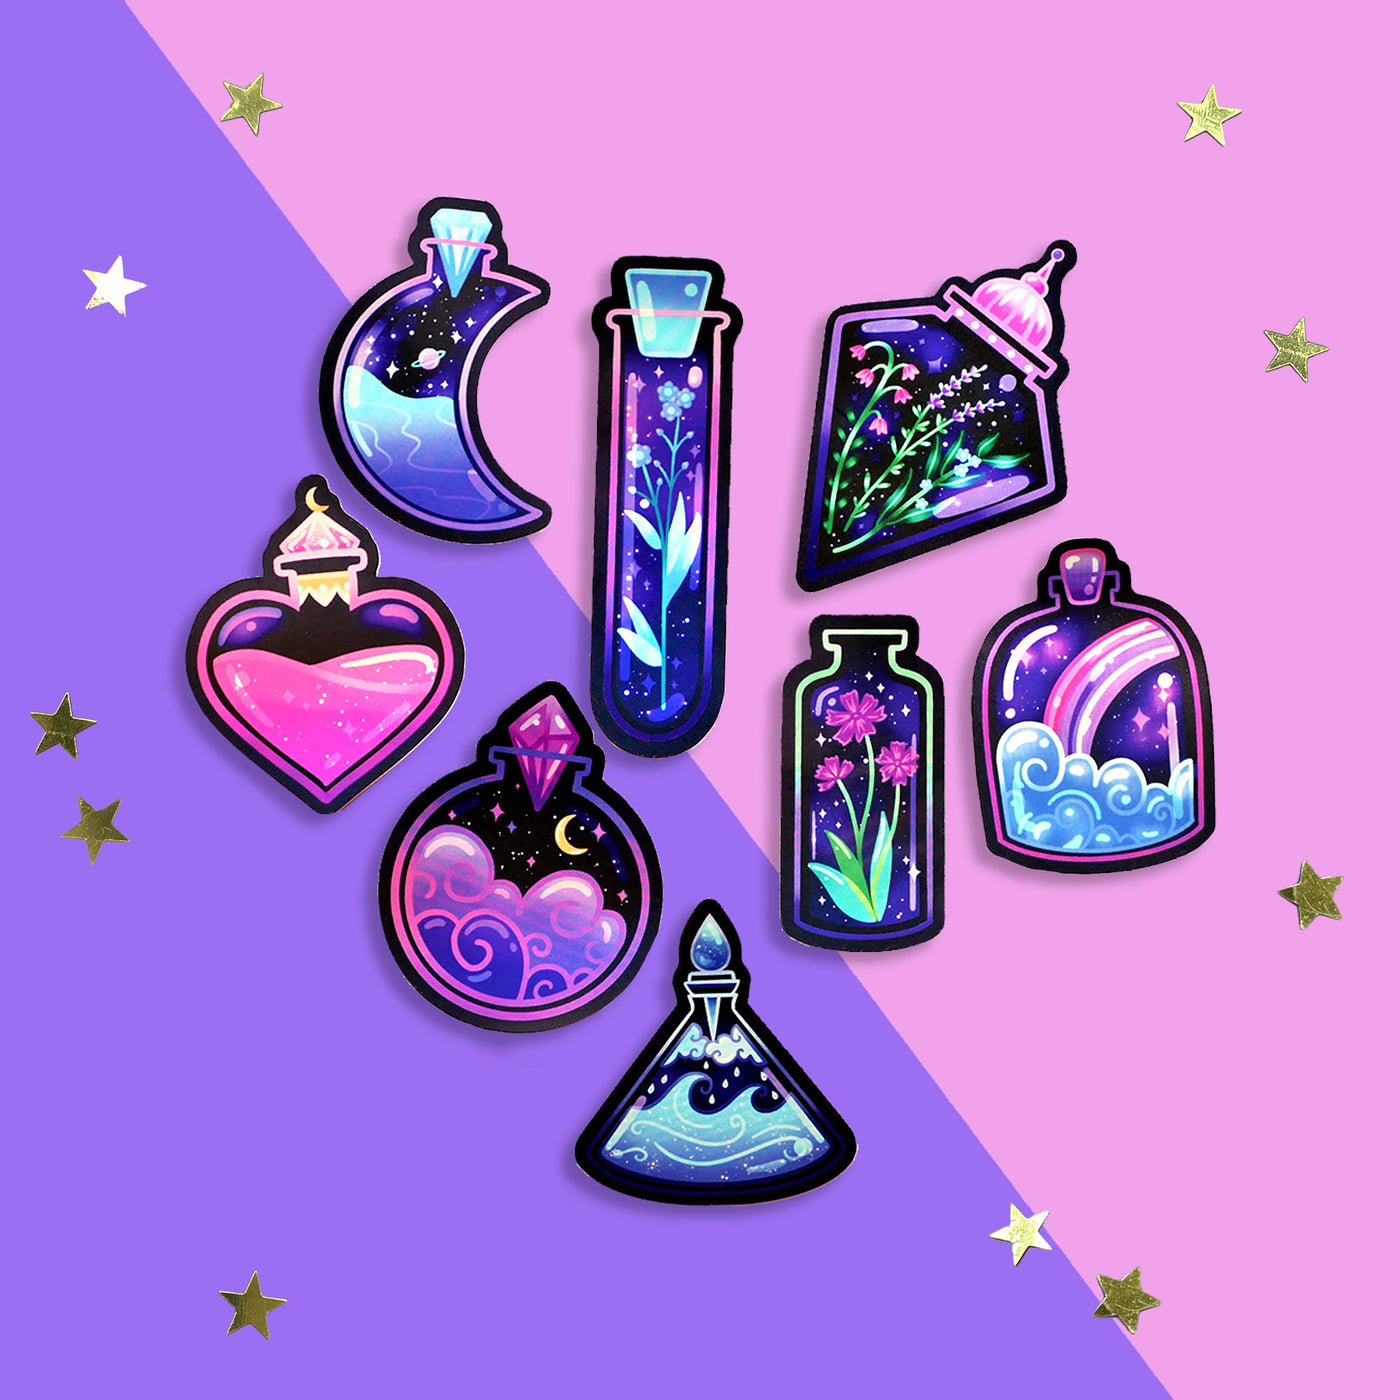 Potion Bottle - Sticker Set - The Quirky Cup Collective